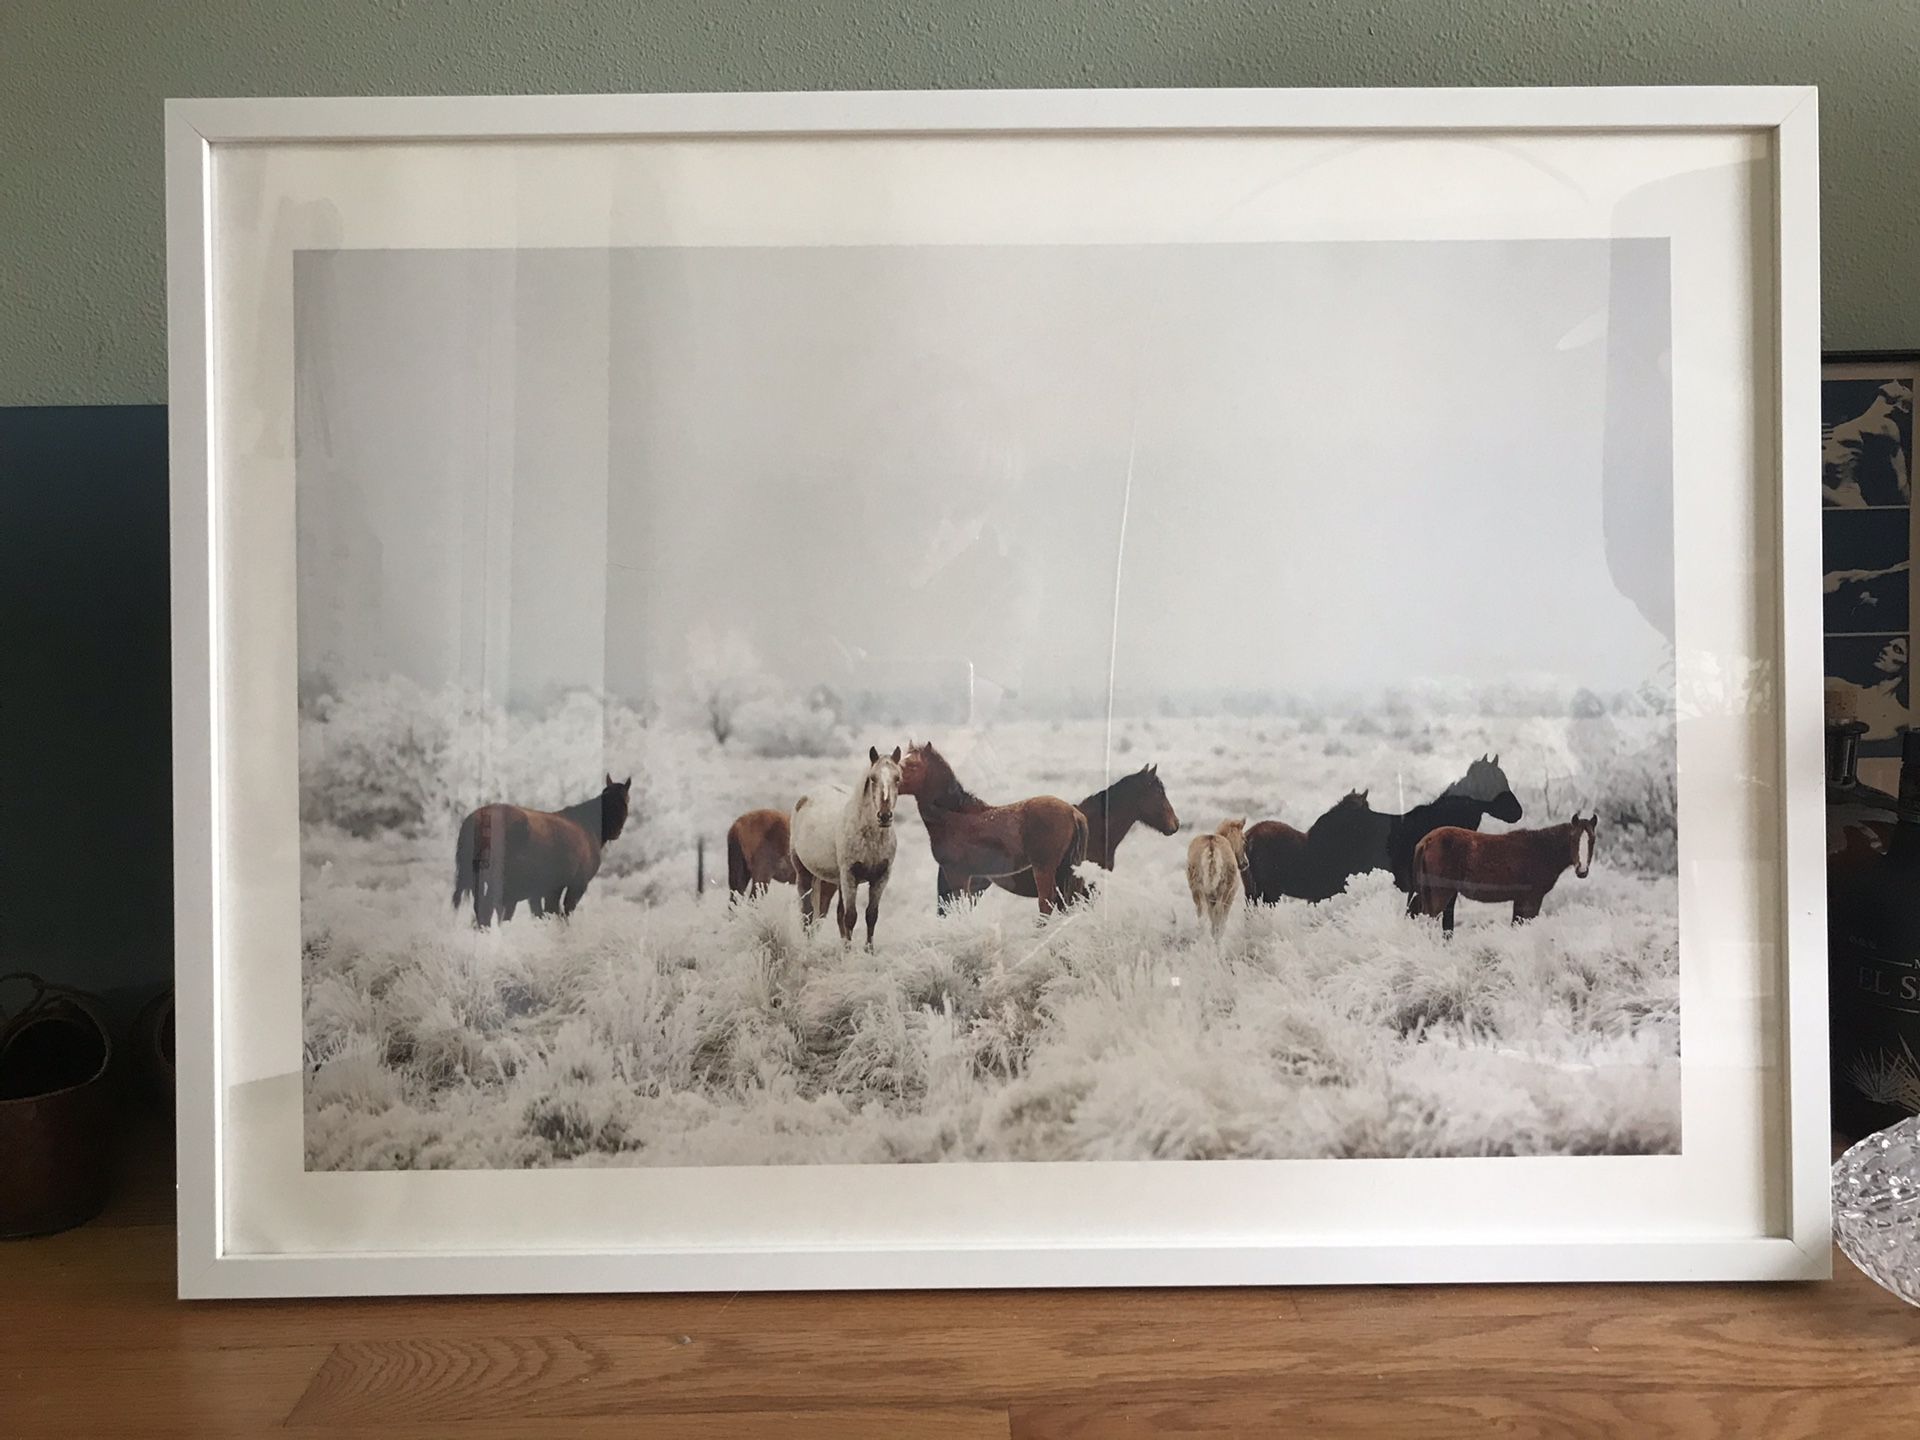 Framed photography print with wild horses